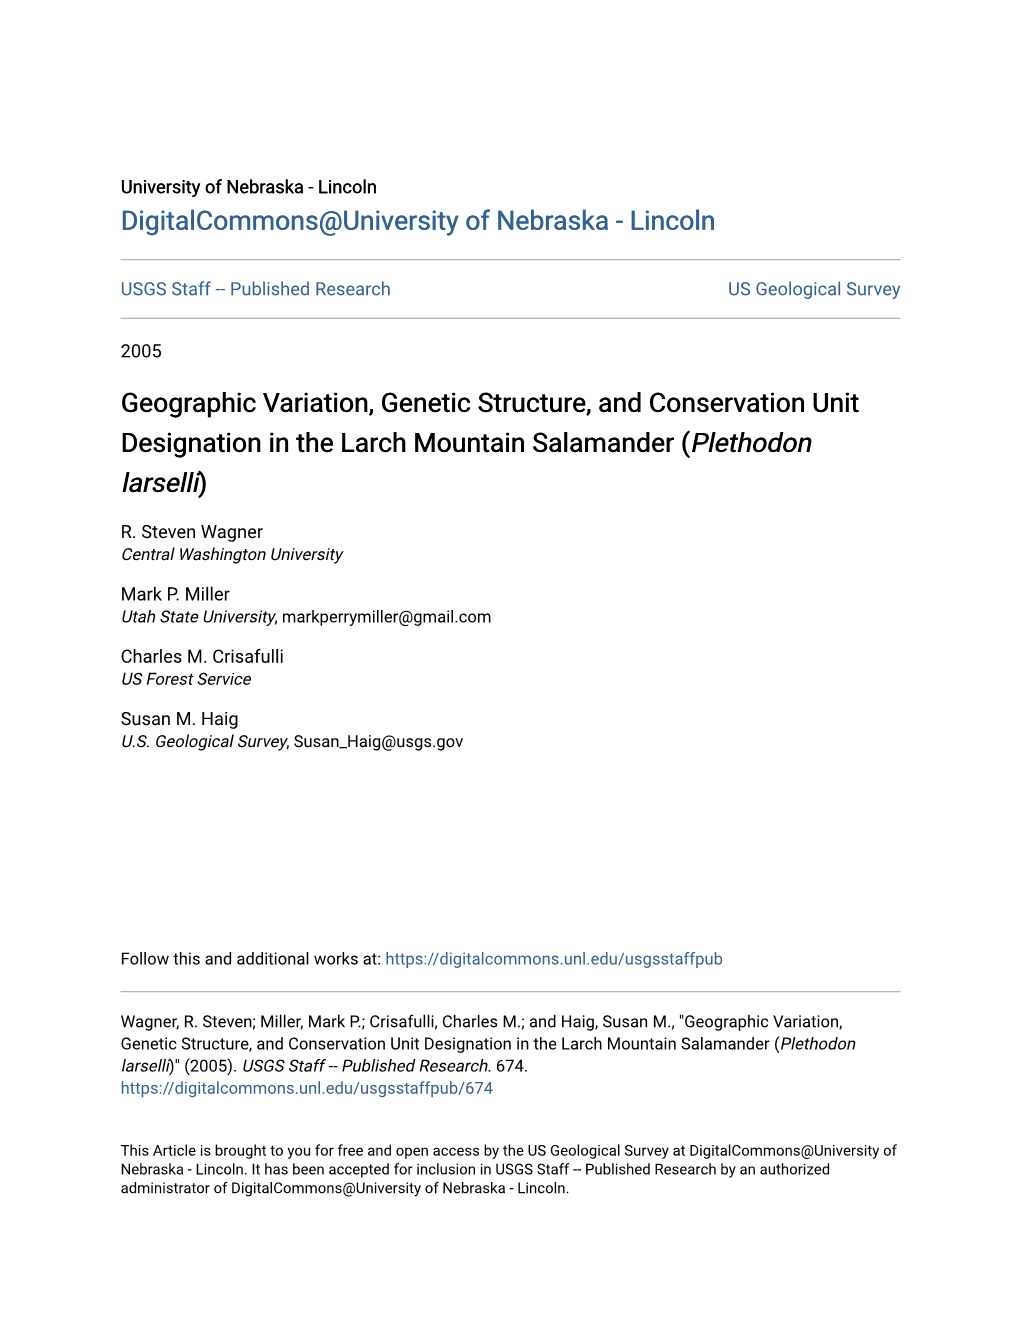 Geographic Variation, Genetic Structure, and Conservation Unit Designation in the Larch Mountain Salamander (Plethodon Larselli)